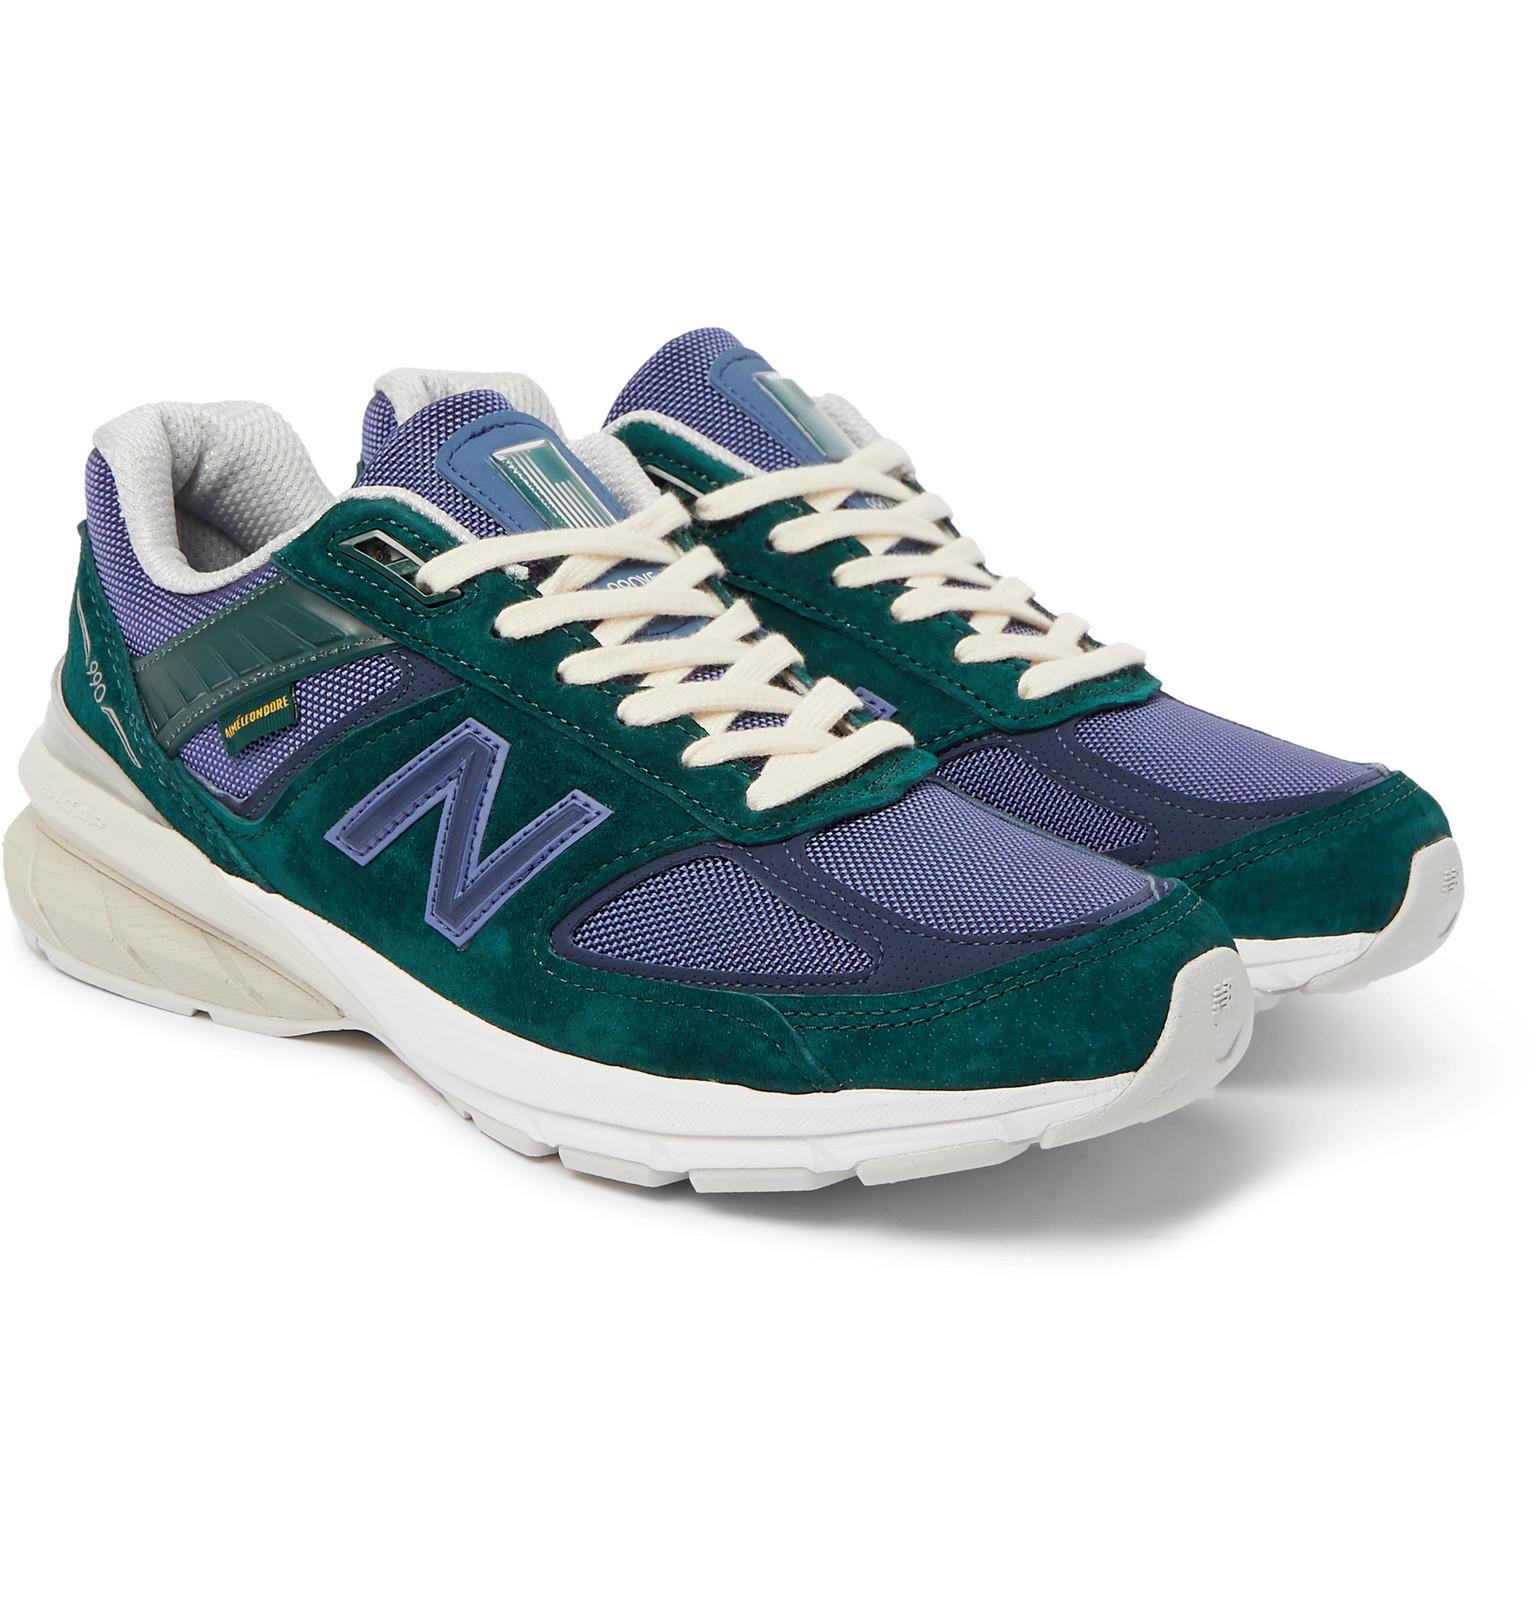 New Balance + Aimé Leon Dore 990v5 Mesh And Suede Sneakers 